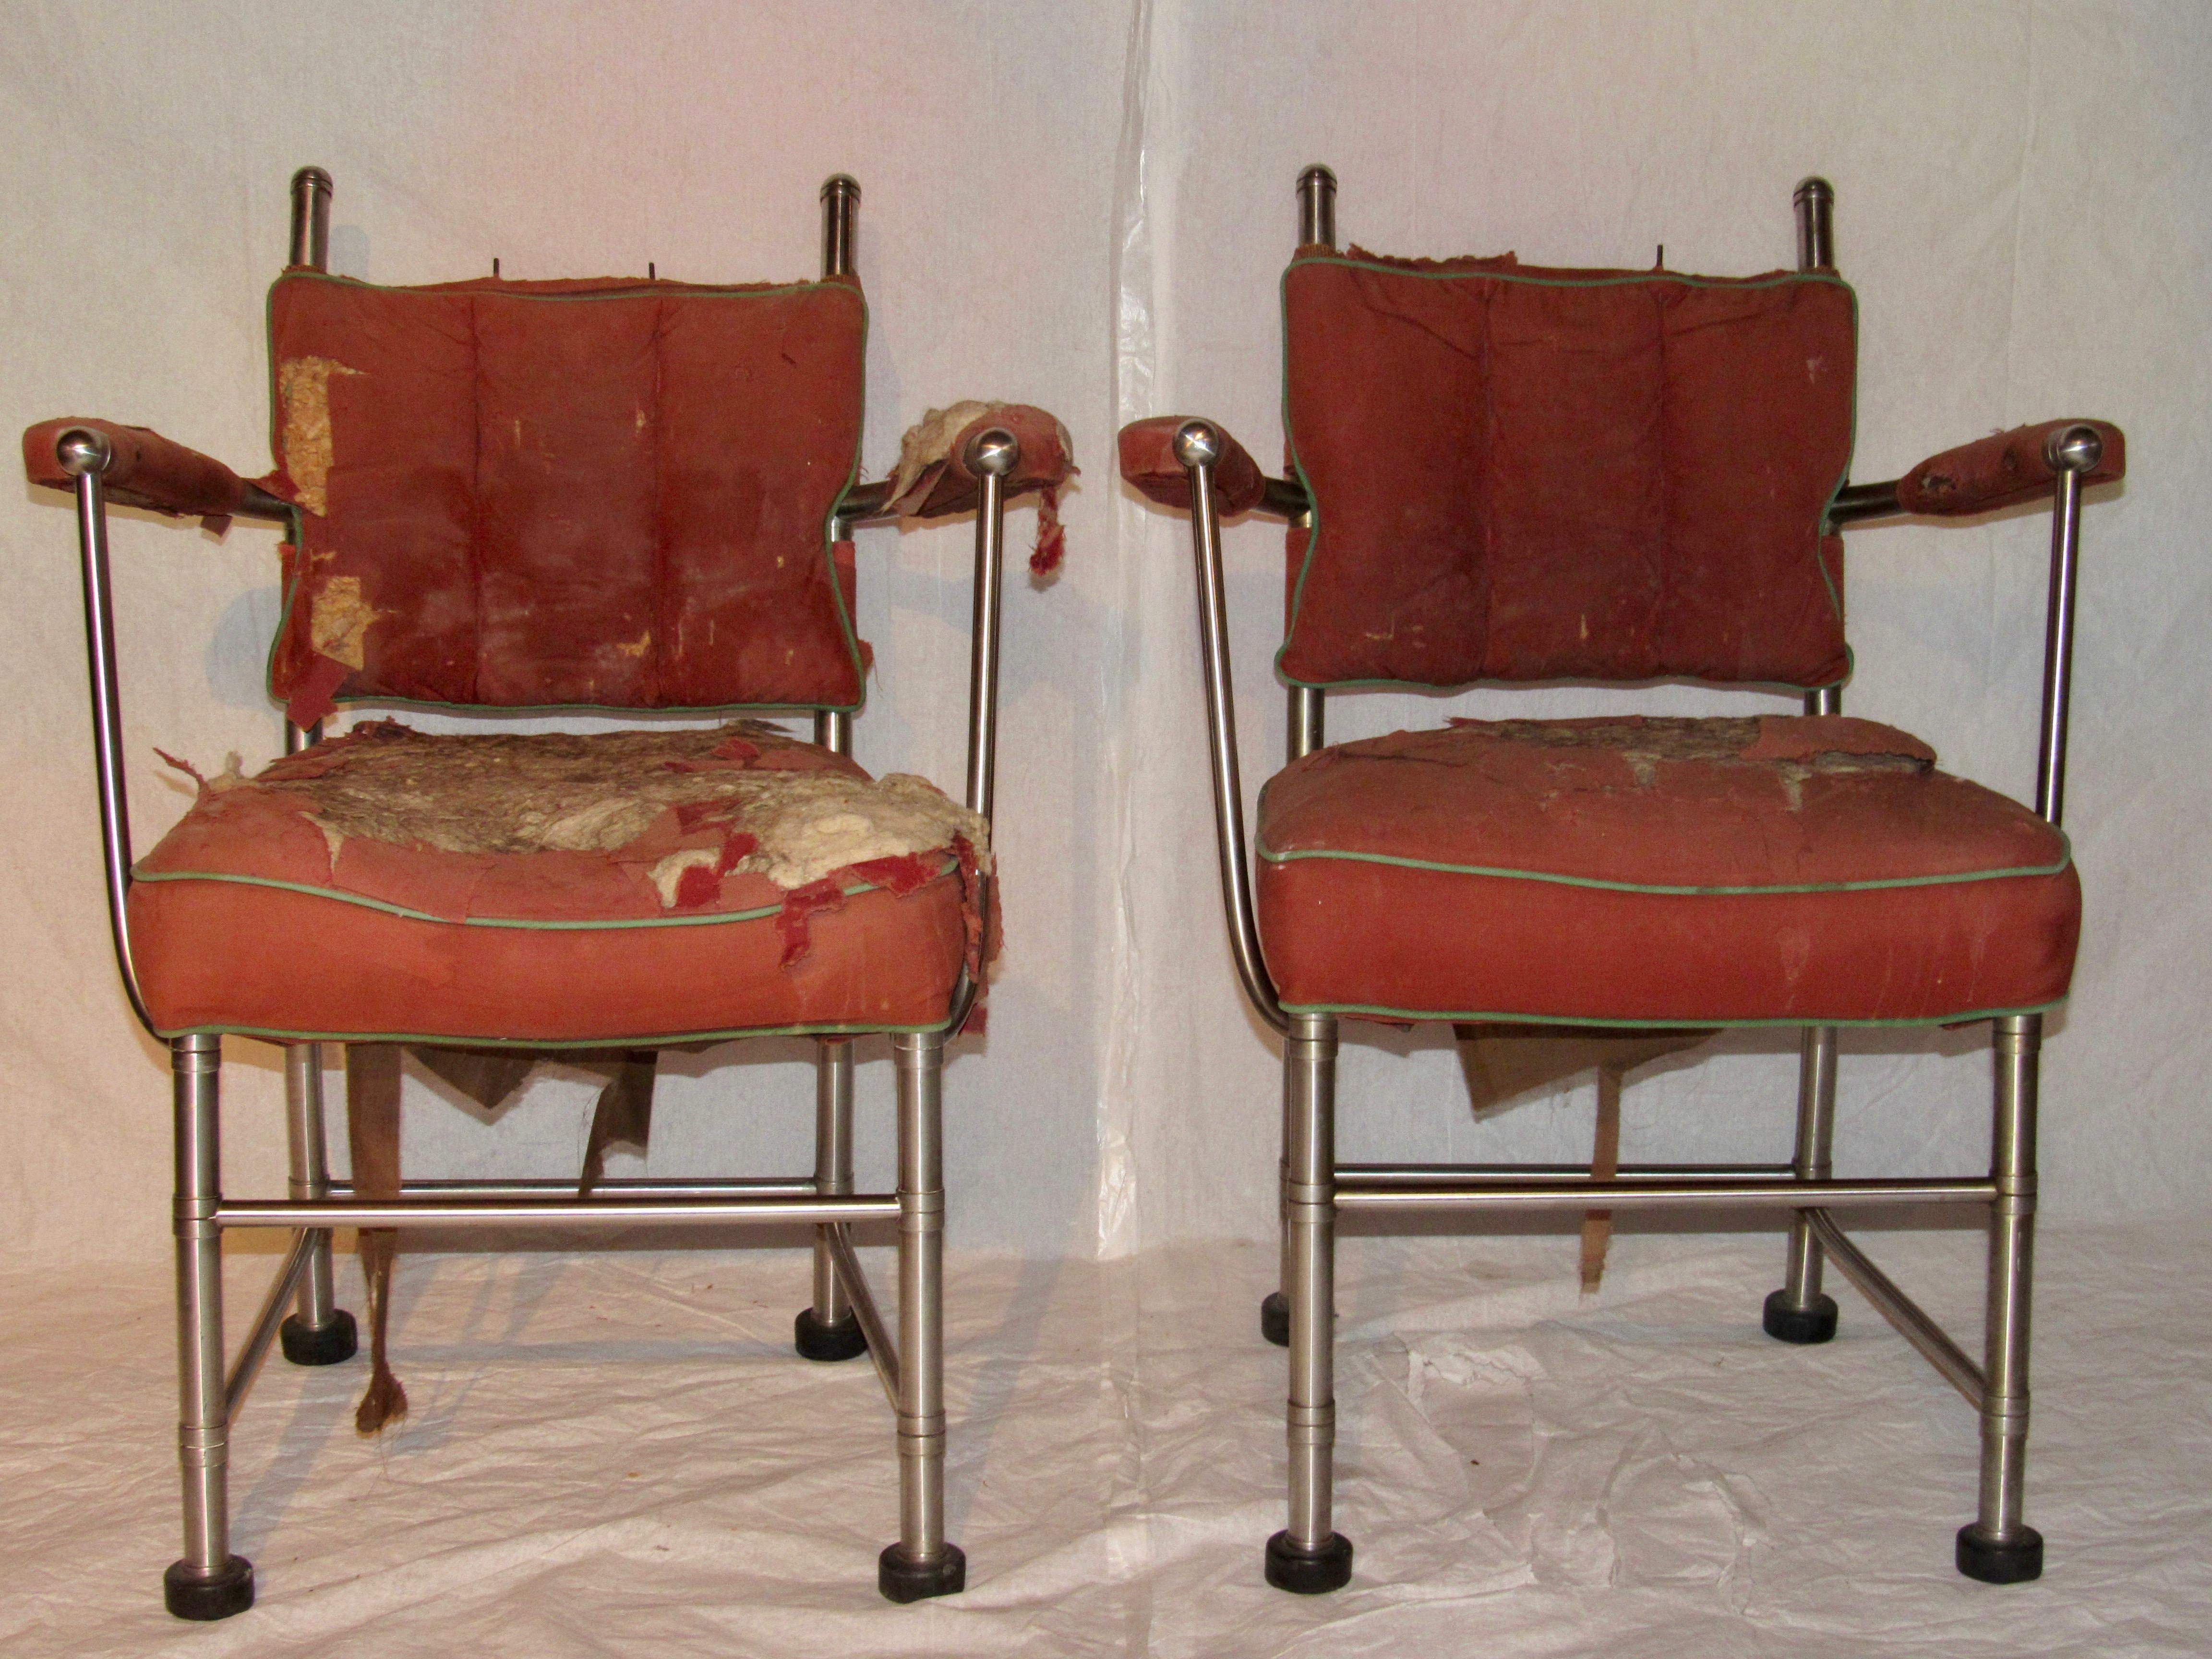 A pair of stainless steel armchairs by the Warren McArthur Corporation from the mid 1930s .  

The armchairs are Style No. 1130AU reproduced on page 3 of the  Warren McArthur Corporation Style Supplement Number One and are described as: 
